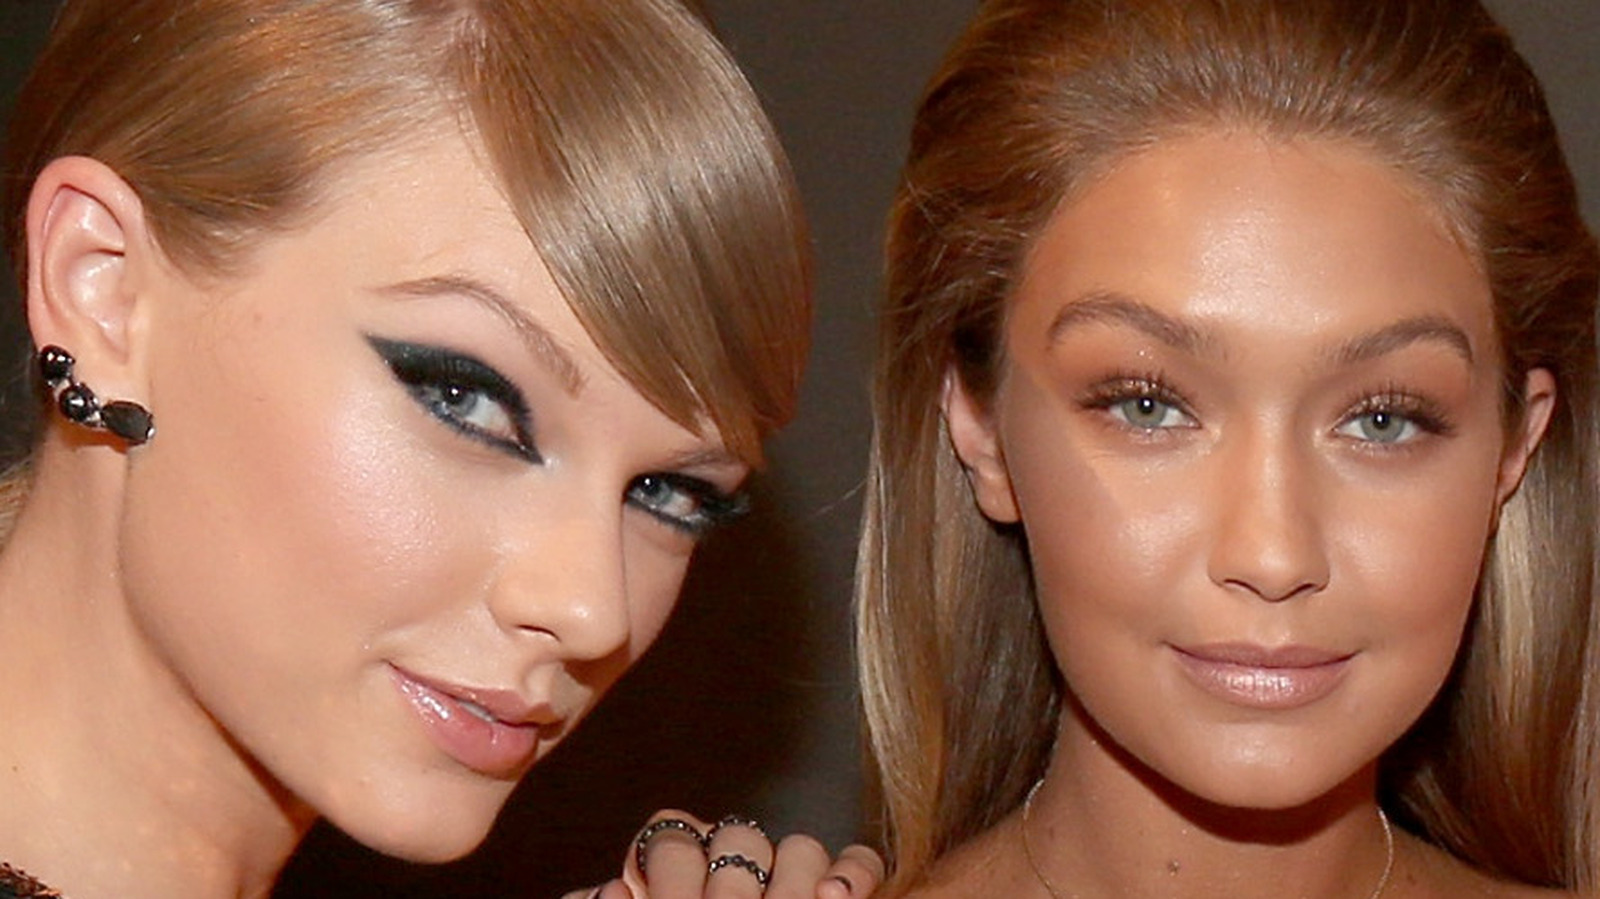 The Truth About Taylor Swift And Gigi Hadid's Friendship